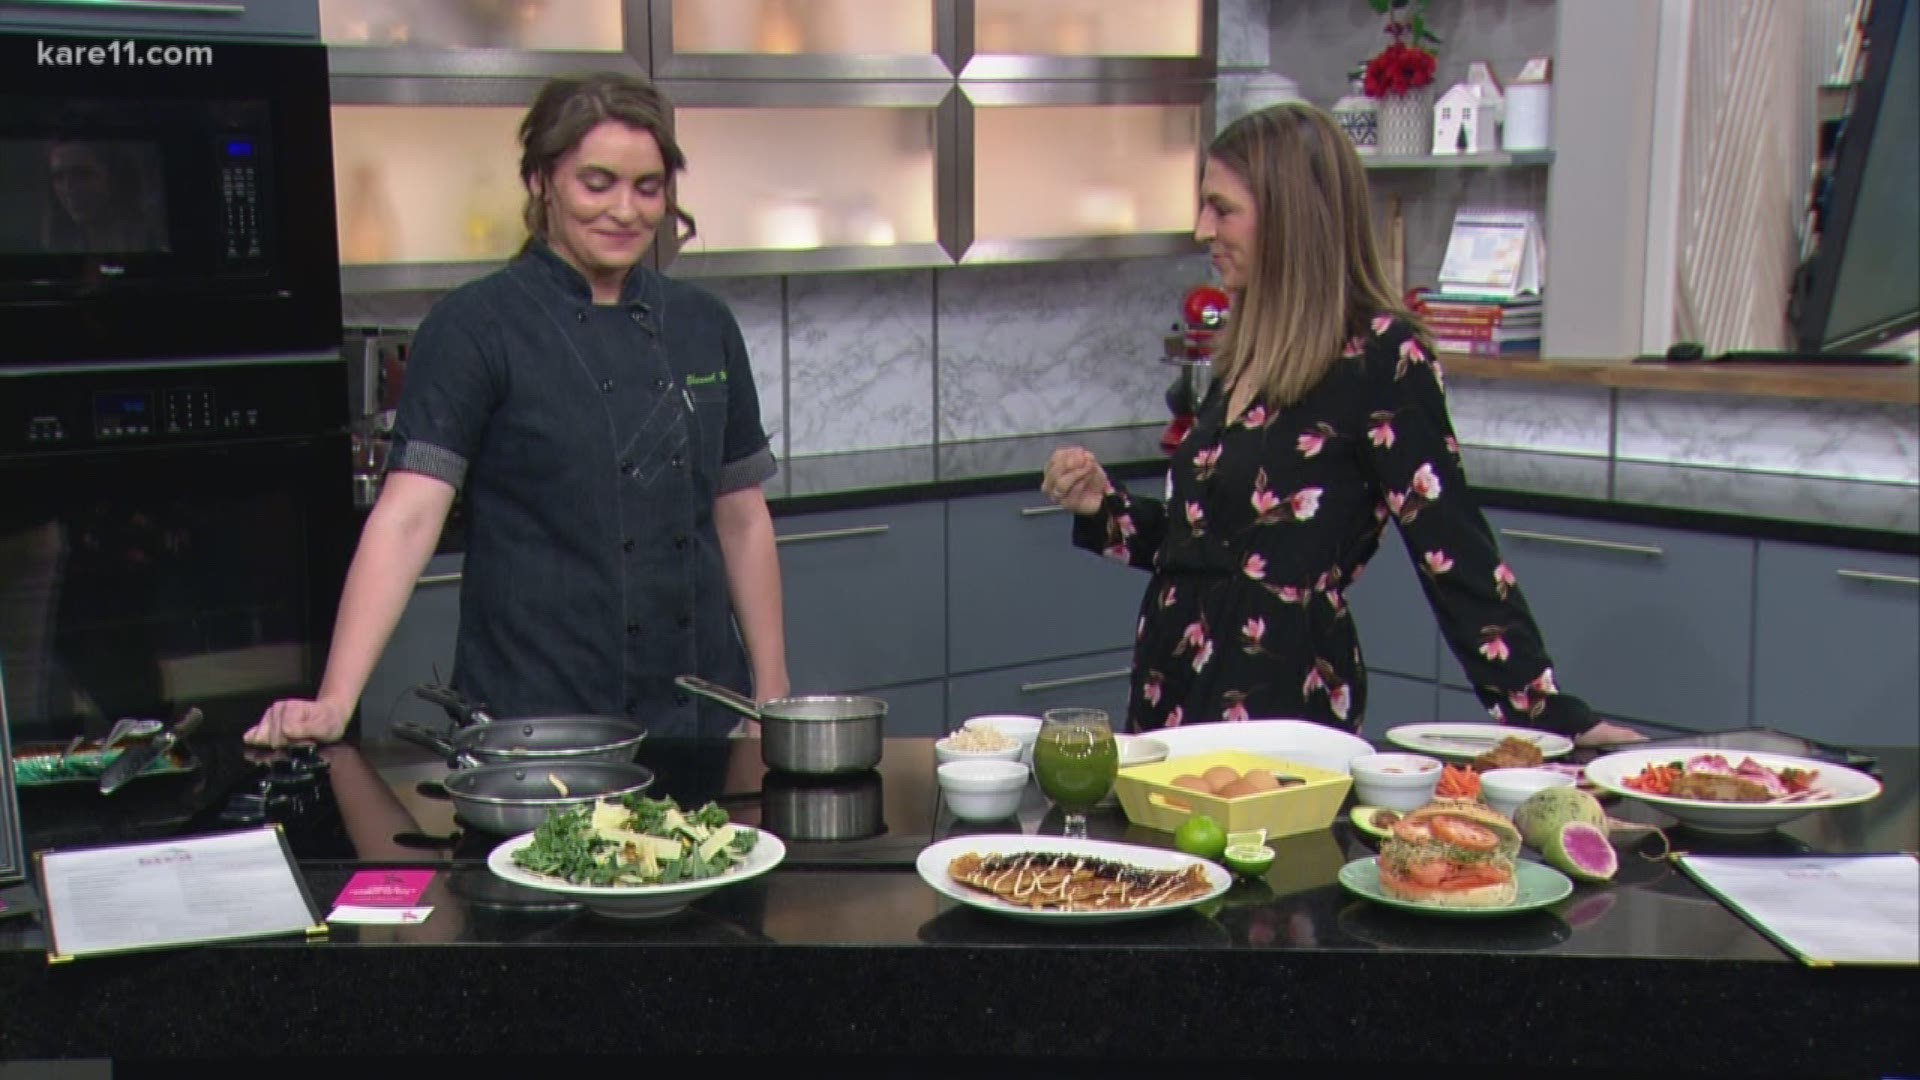 Chef Shannel Winkel from the Bird is a Charlie Award nominee for Rising Star. She cooks up some of the most popular dishes at her restaurant.

https://www.kare11.com/article/news/local/kare11-saturday/recipe-and-the-bird-chef-nominated-for-rising-star-cha